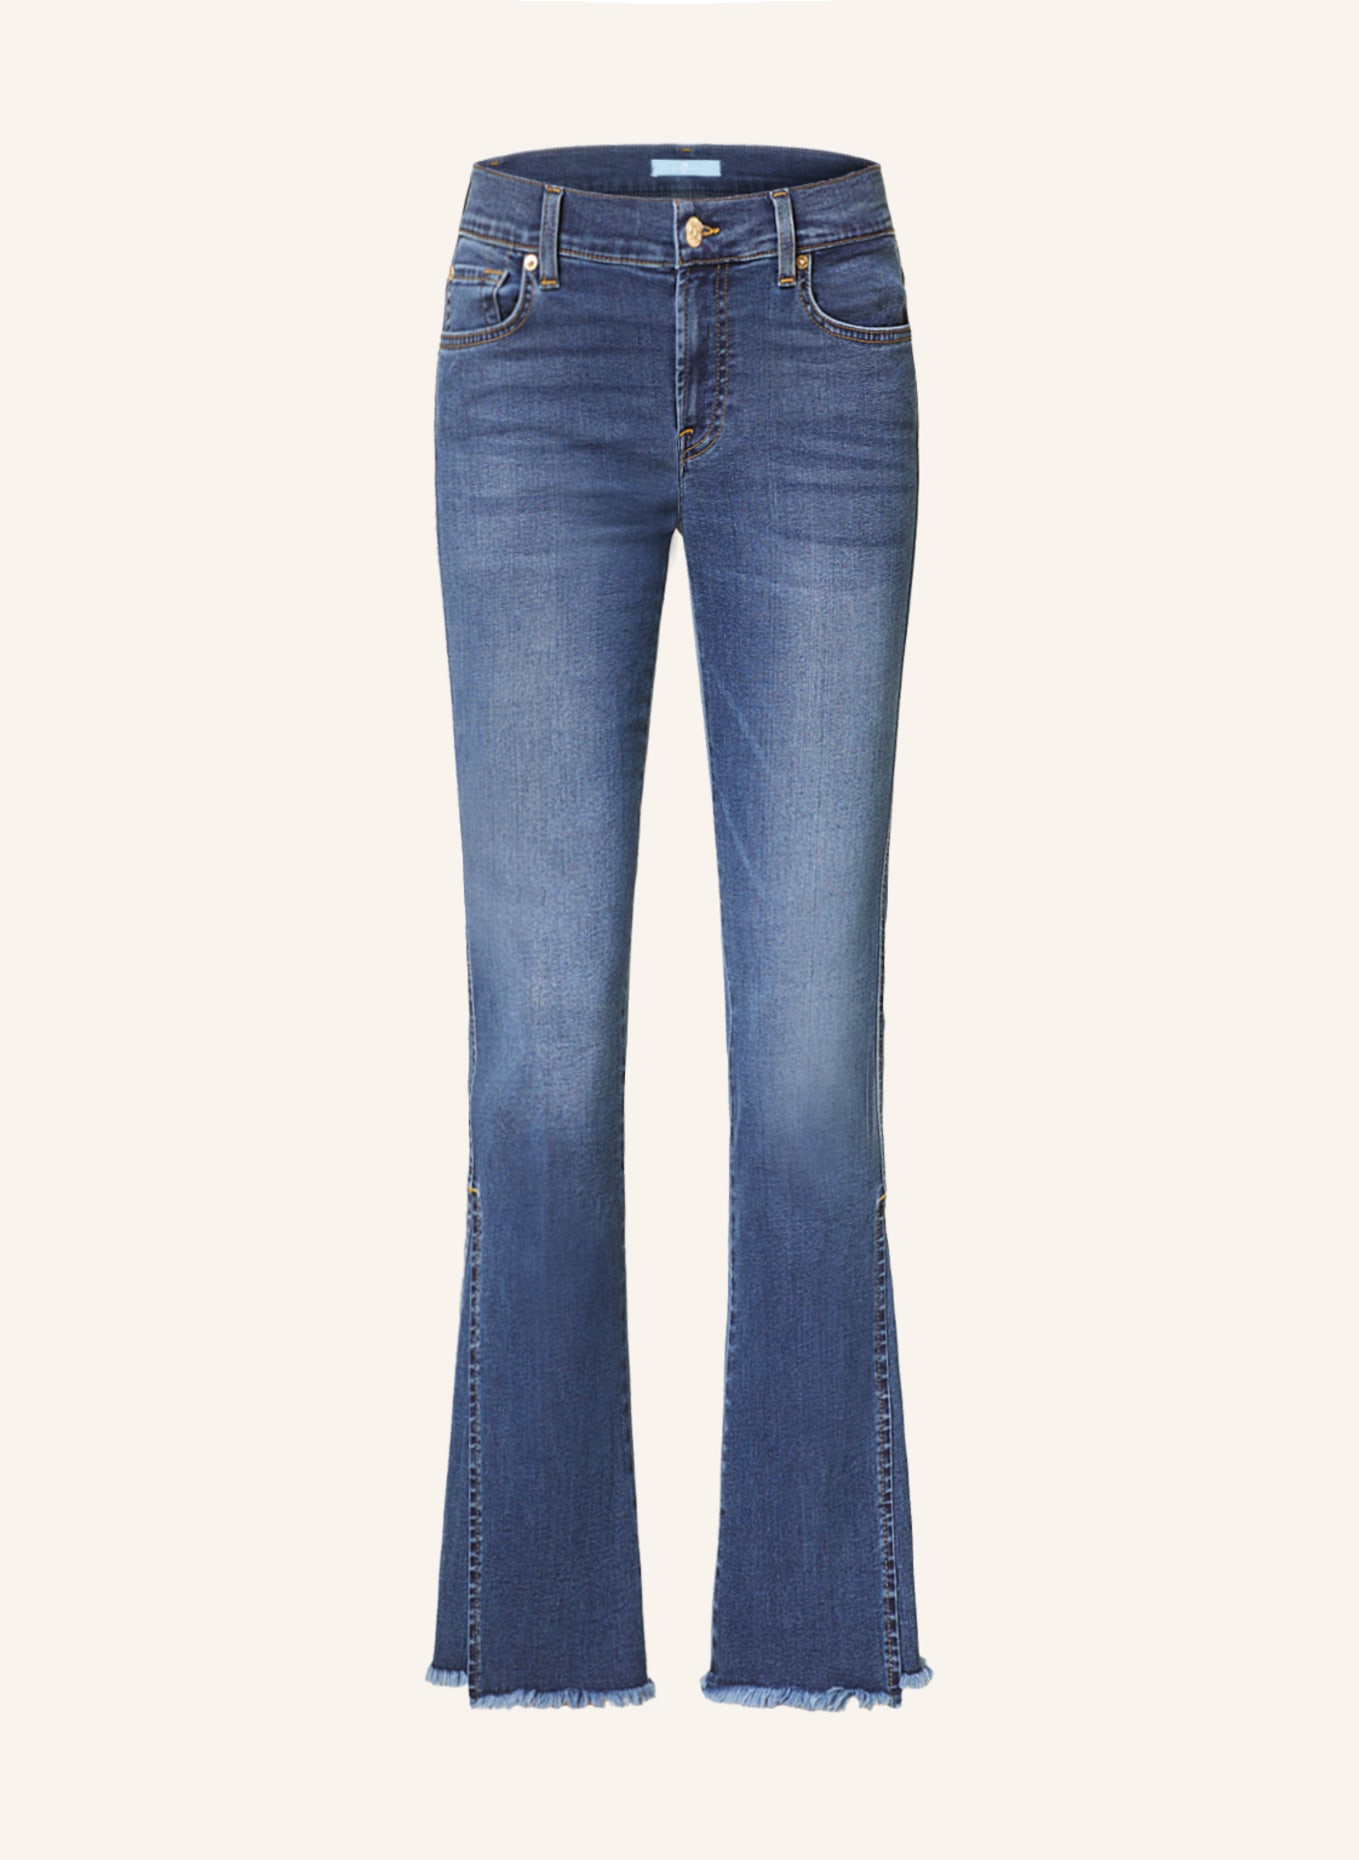 7 for all mankind Bootcut Jeans TAILORLESS, Farbe: DD MID BLUE (Bild 1)